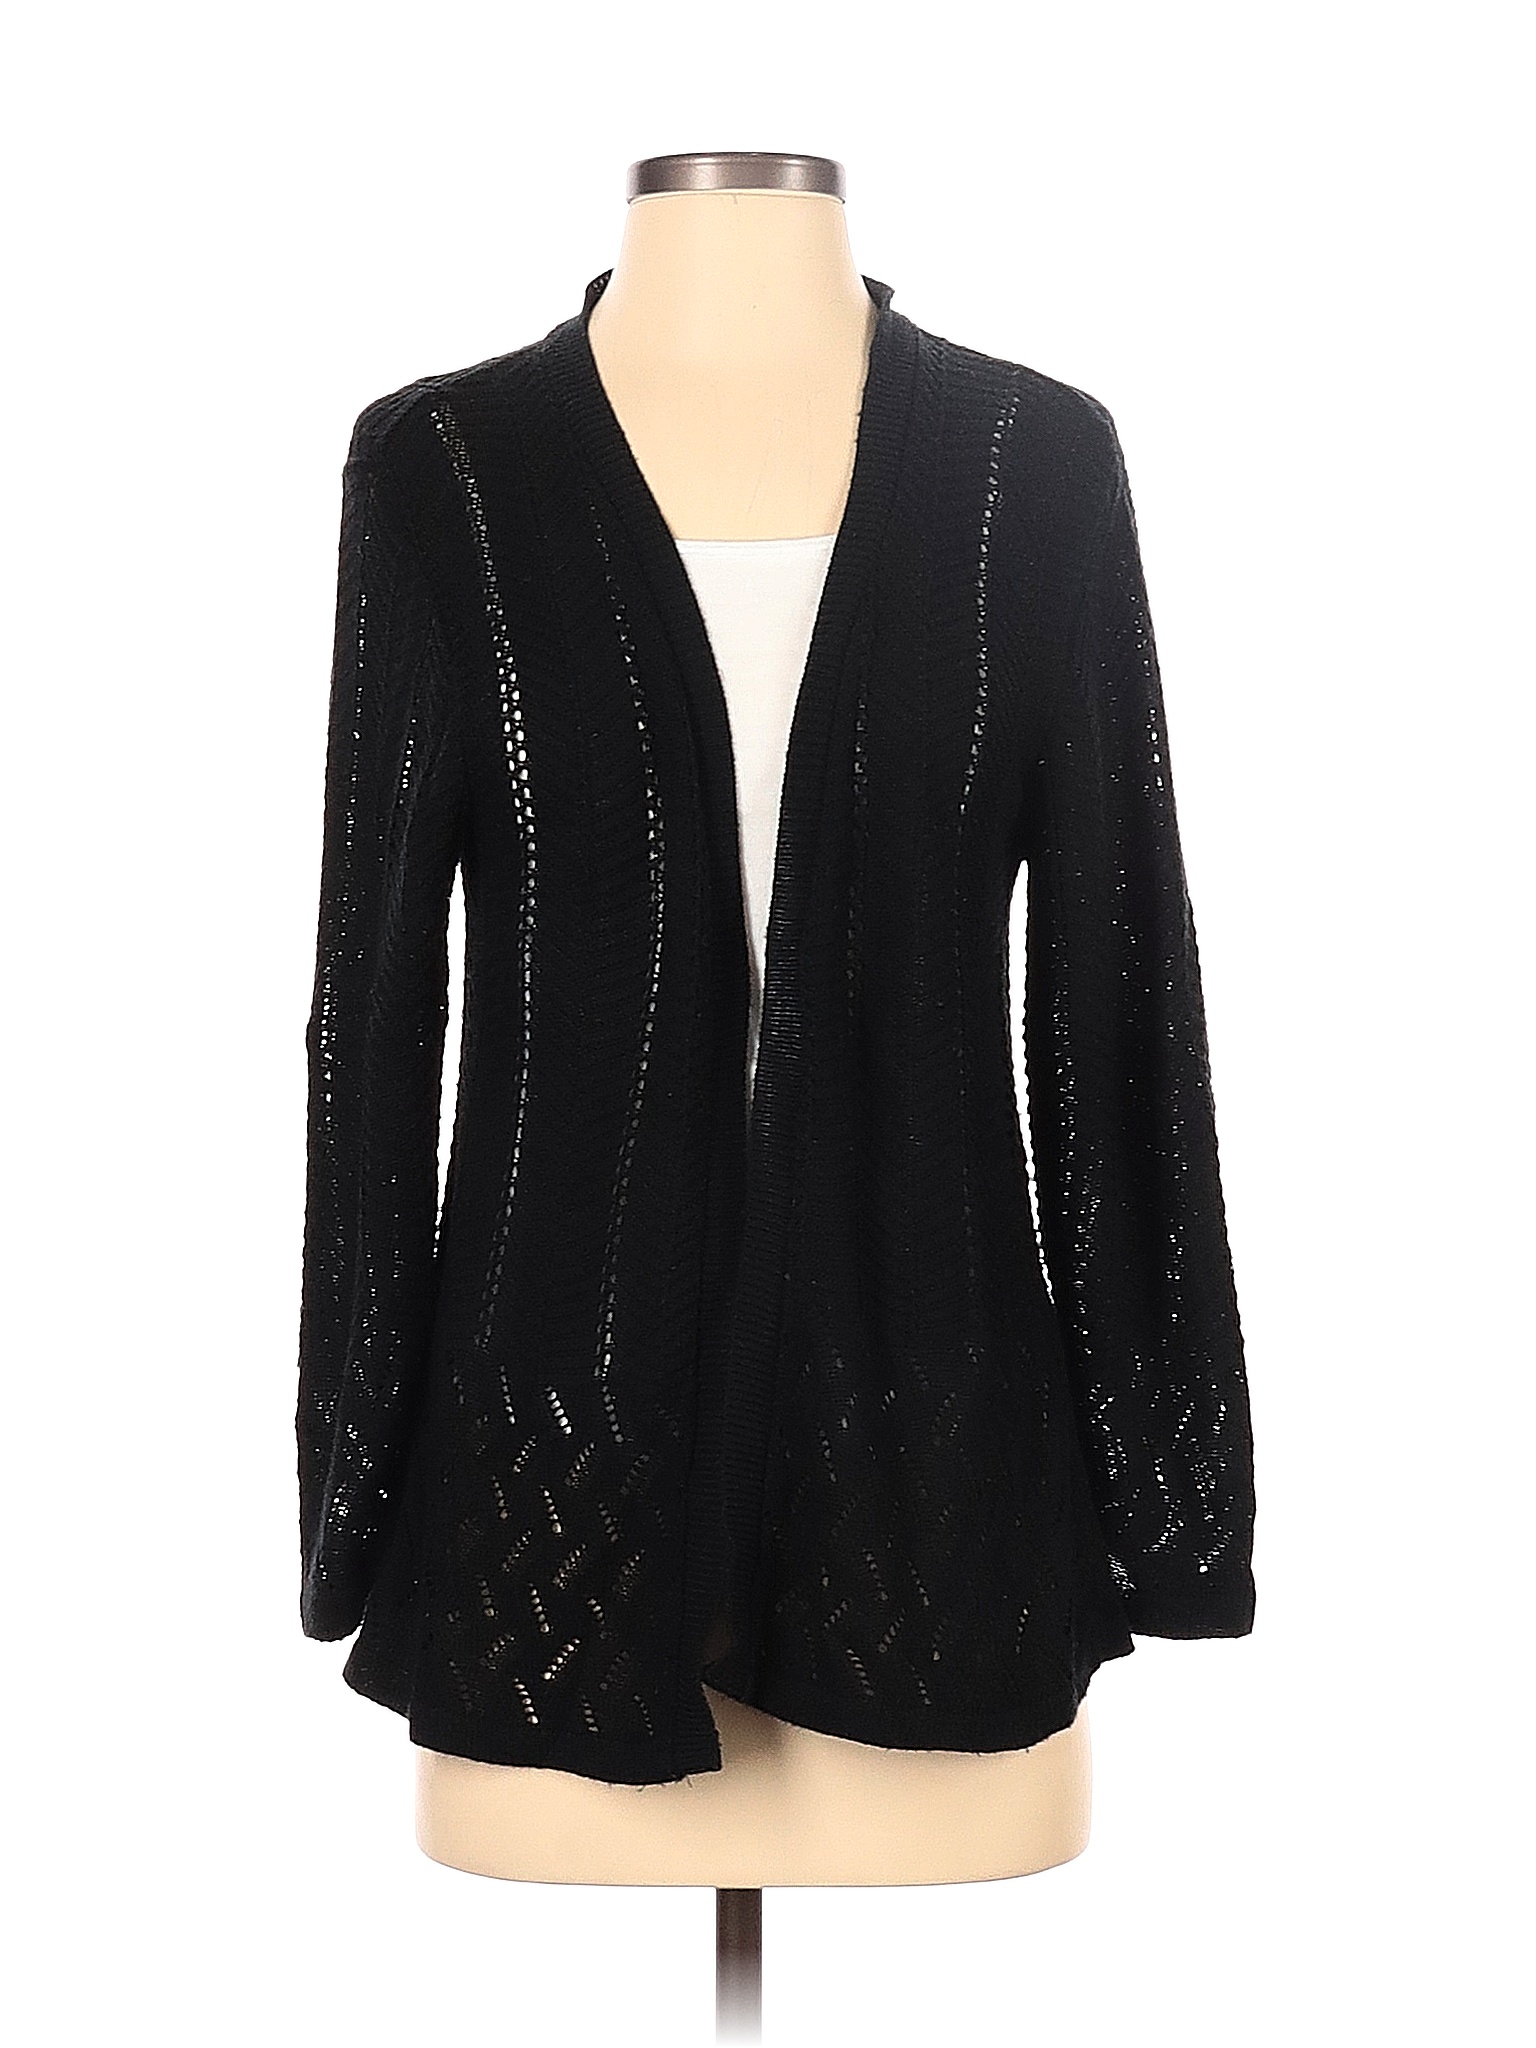 Notations 100% Acrylic Color Block Solid Black Cardigan Size S - 56% ...